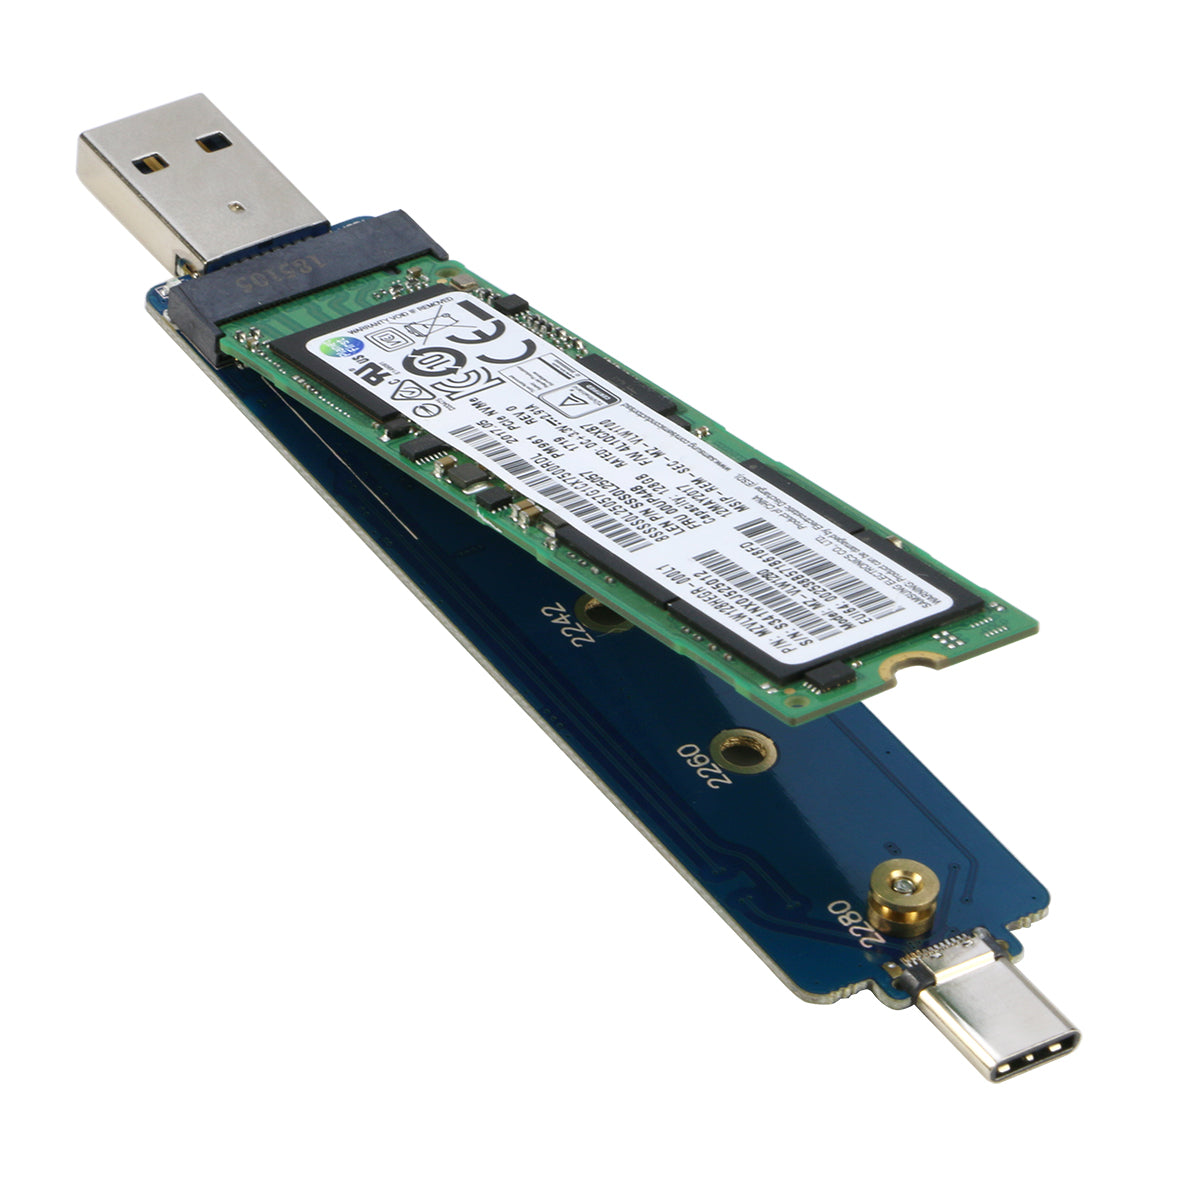 RIITOP USB Adapter PCIe M.2 to USB 3.1 Gen2 Type A and